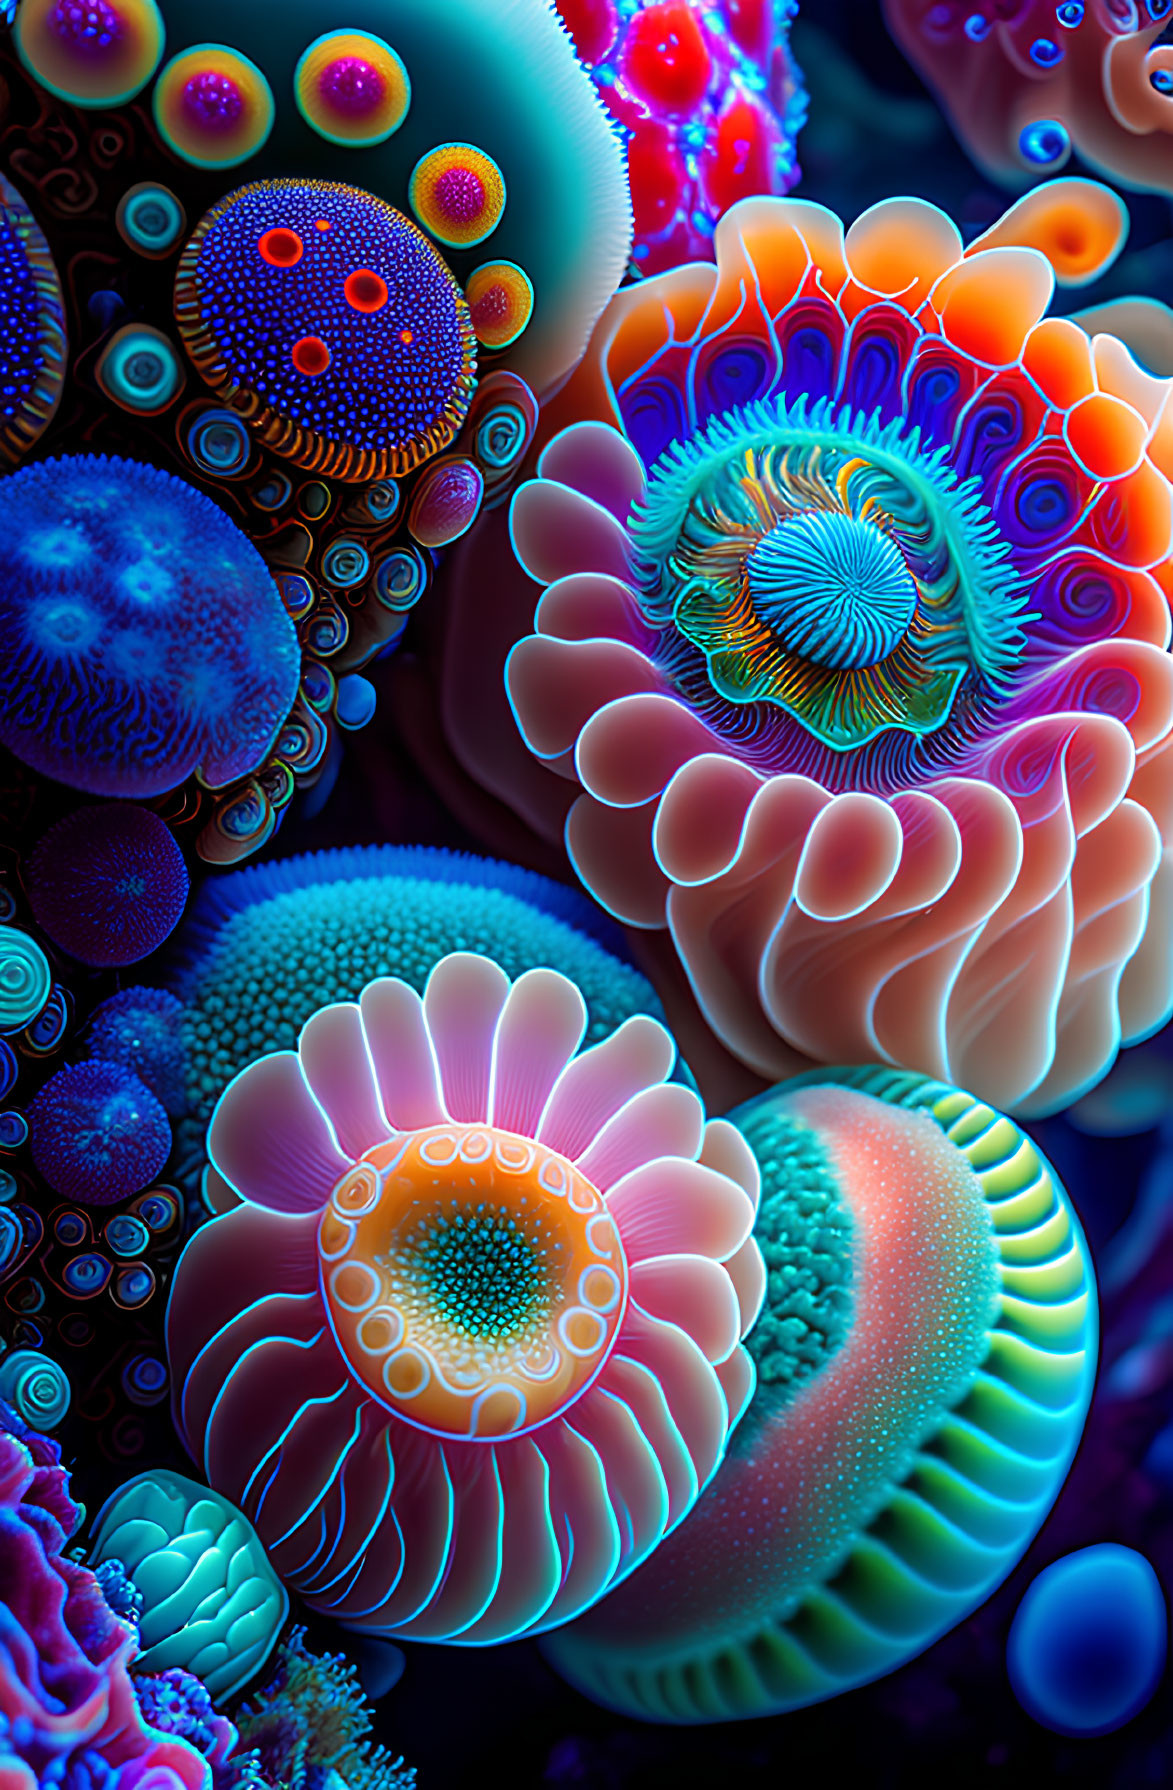 Colorful Abstract Digital Artwork with Intricate Sea Anemone-Like Patterns